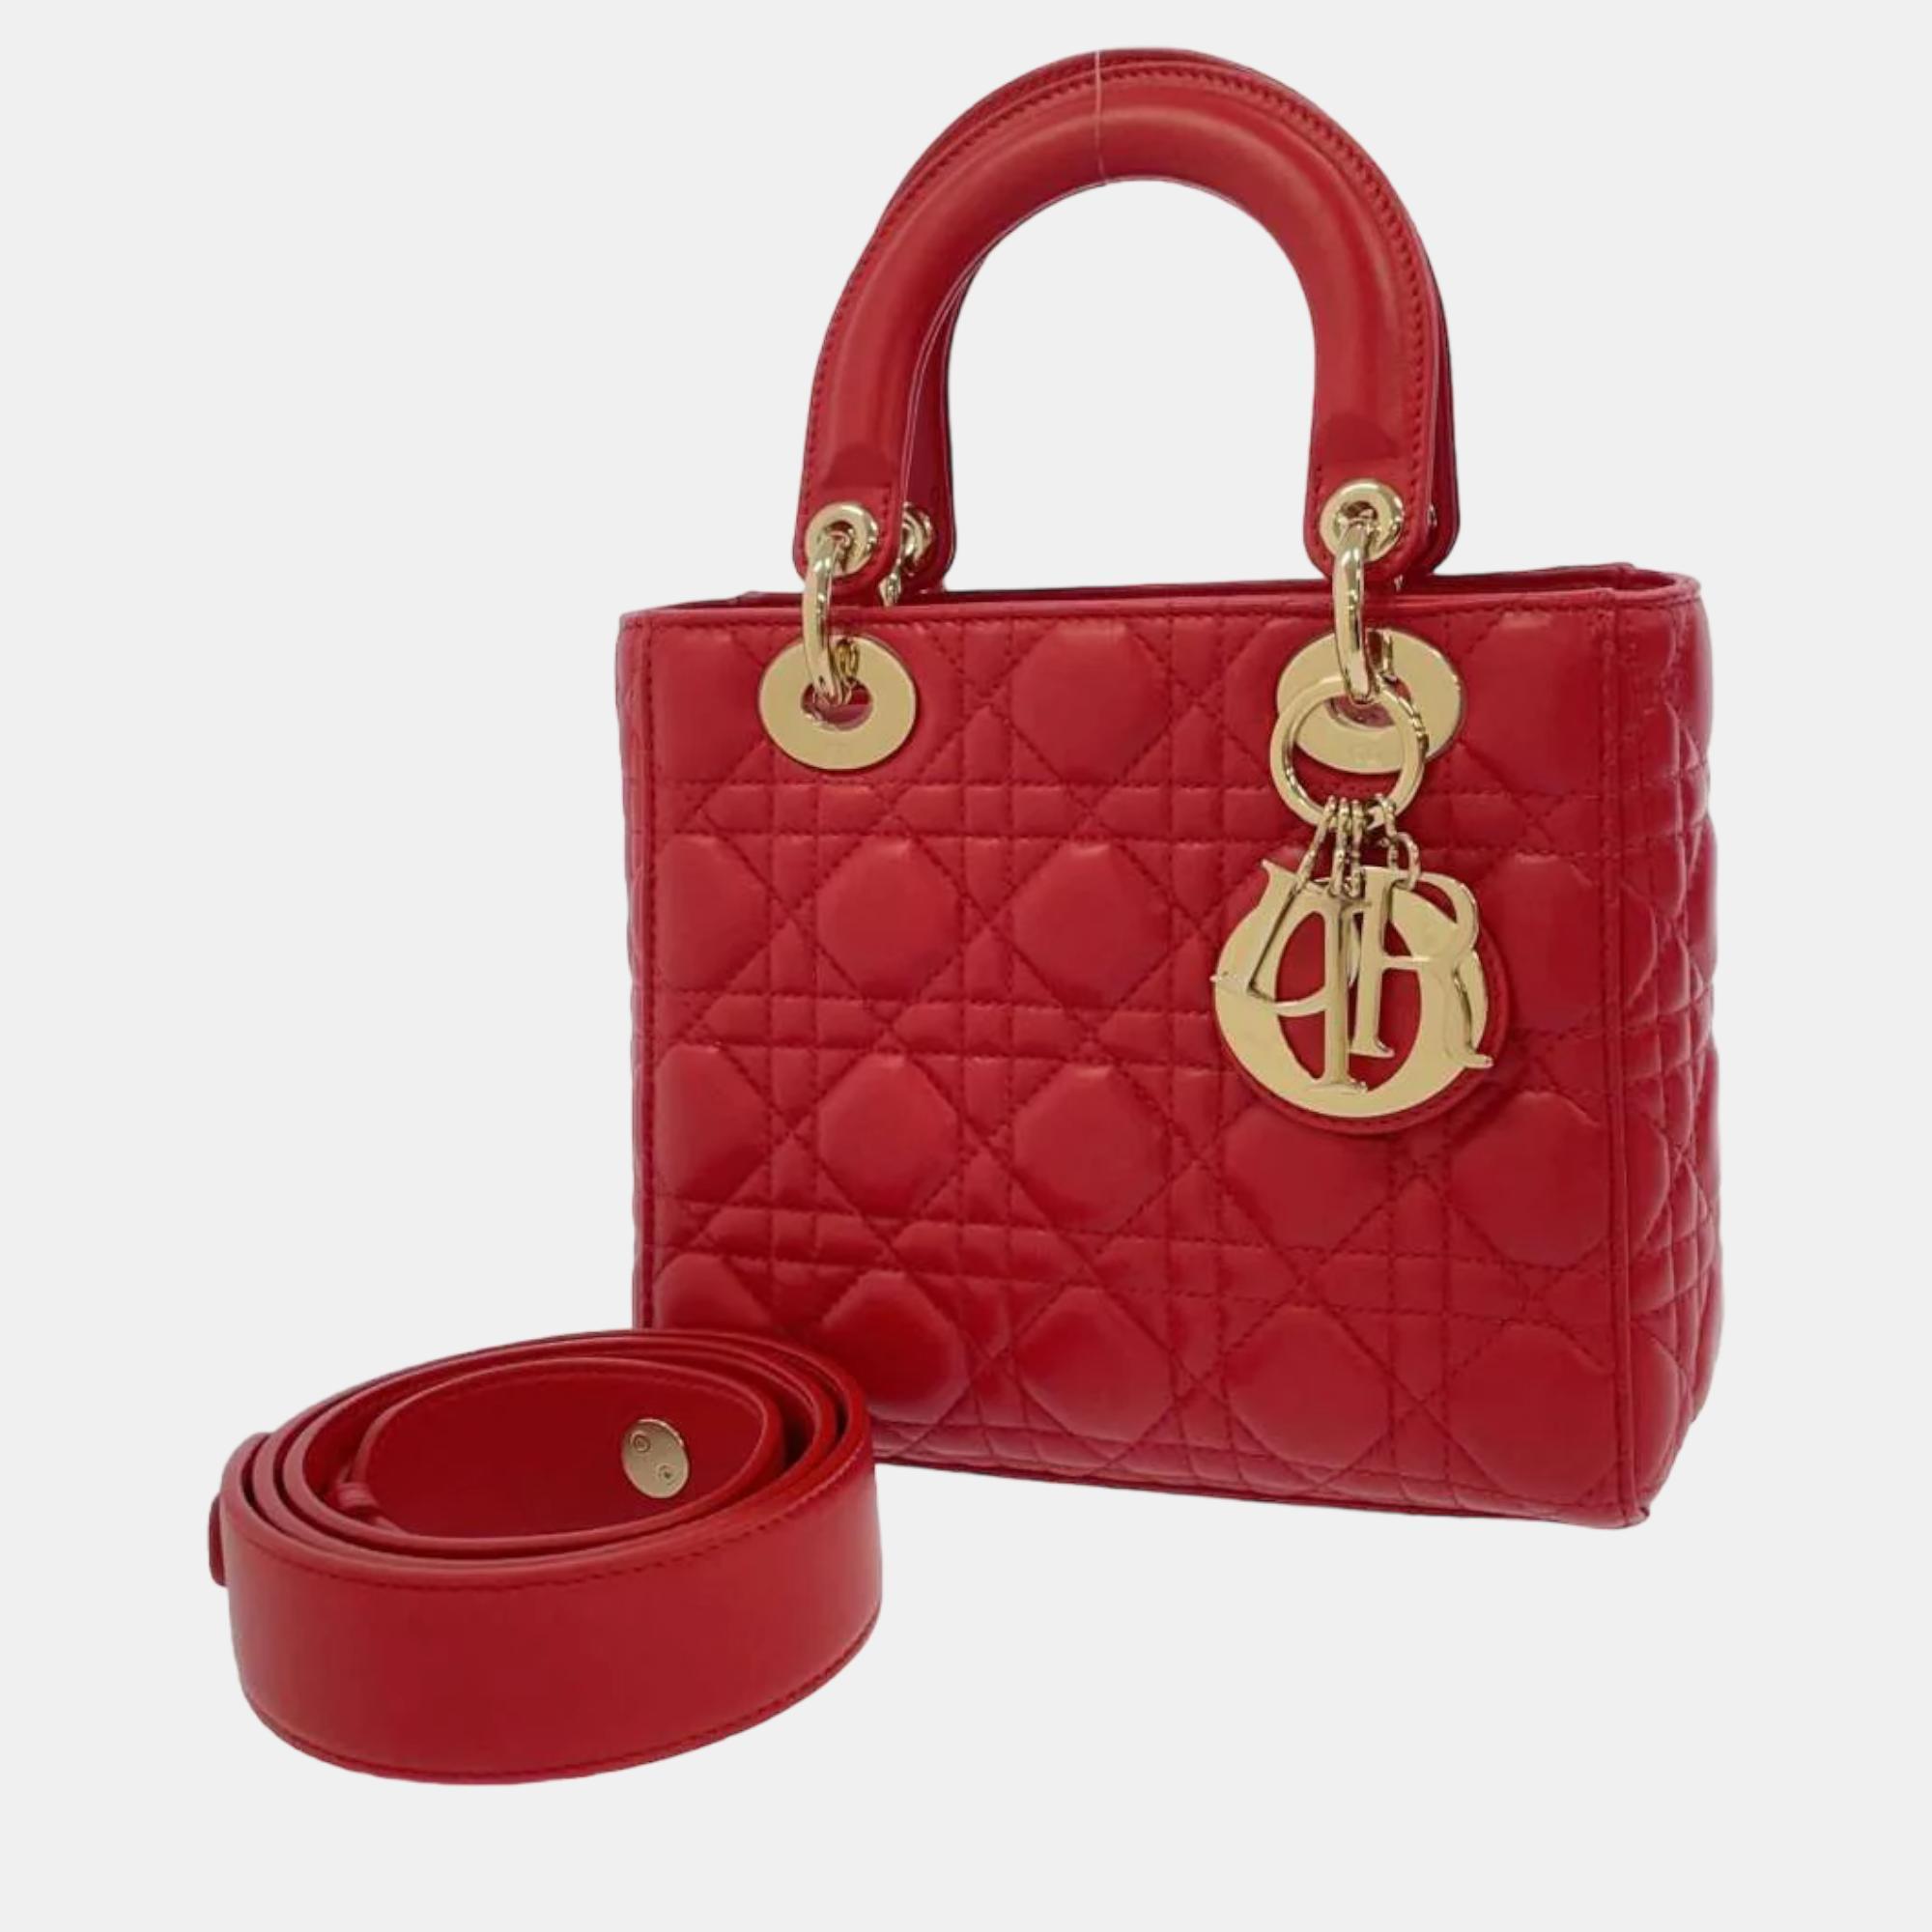 Dior Red Leather Small Lady Dior Top Handle Bag